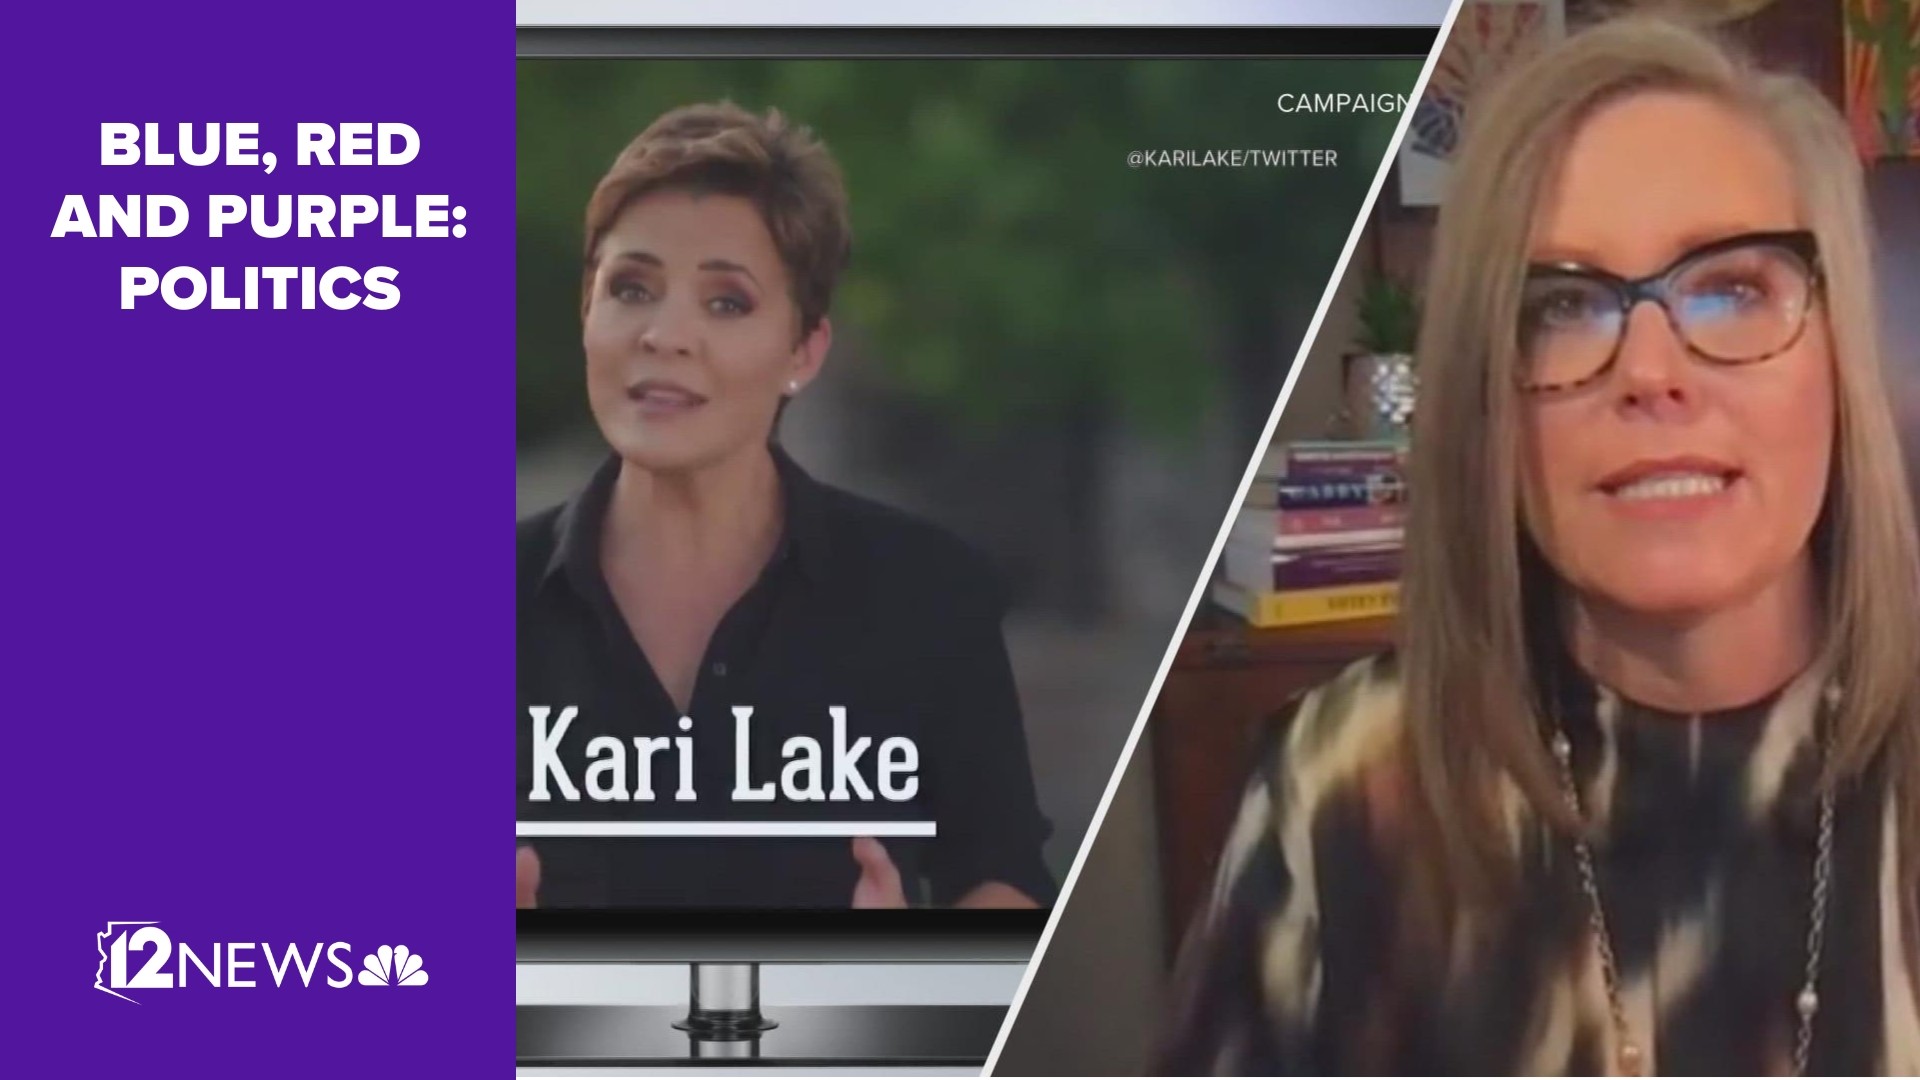 The commission is postponing its televised interview with gubernatorial candidate Kari Lake after her opponent, Katie Hobbs, arranged a 1-on-1 interview with PBS.